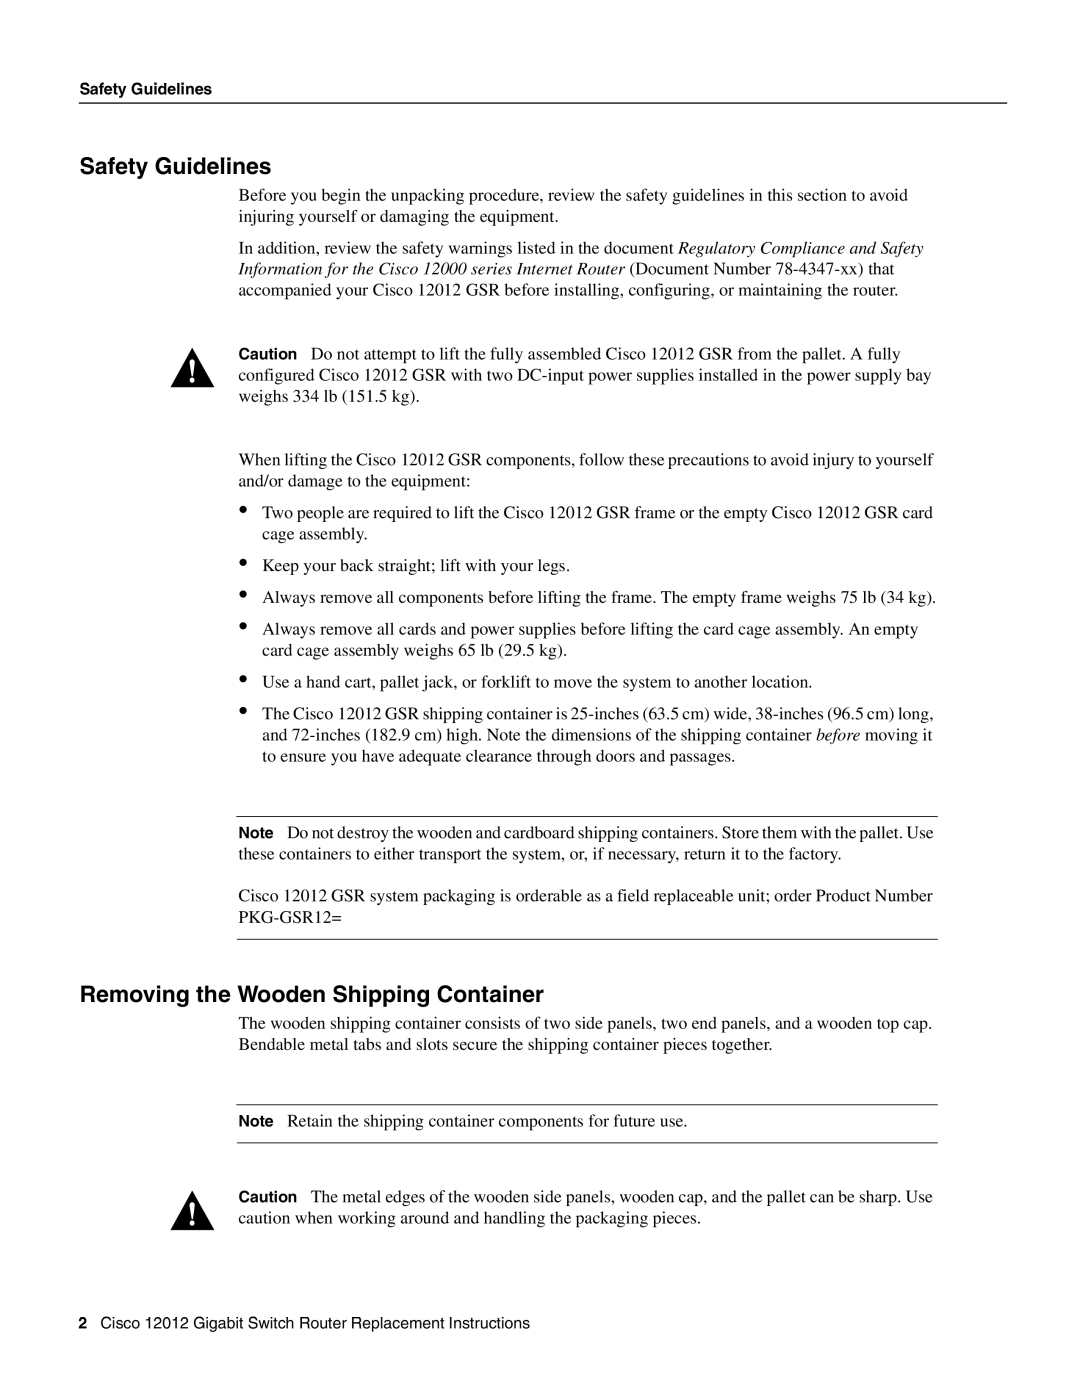 Cisco Systems Cisco 12012 manual Safety Guidelines, Removing the Wooden Shipping Container 